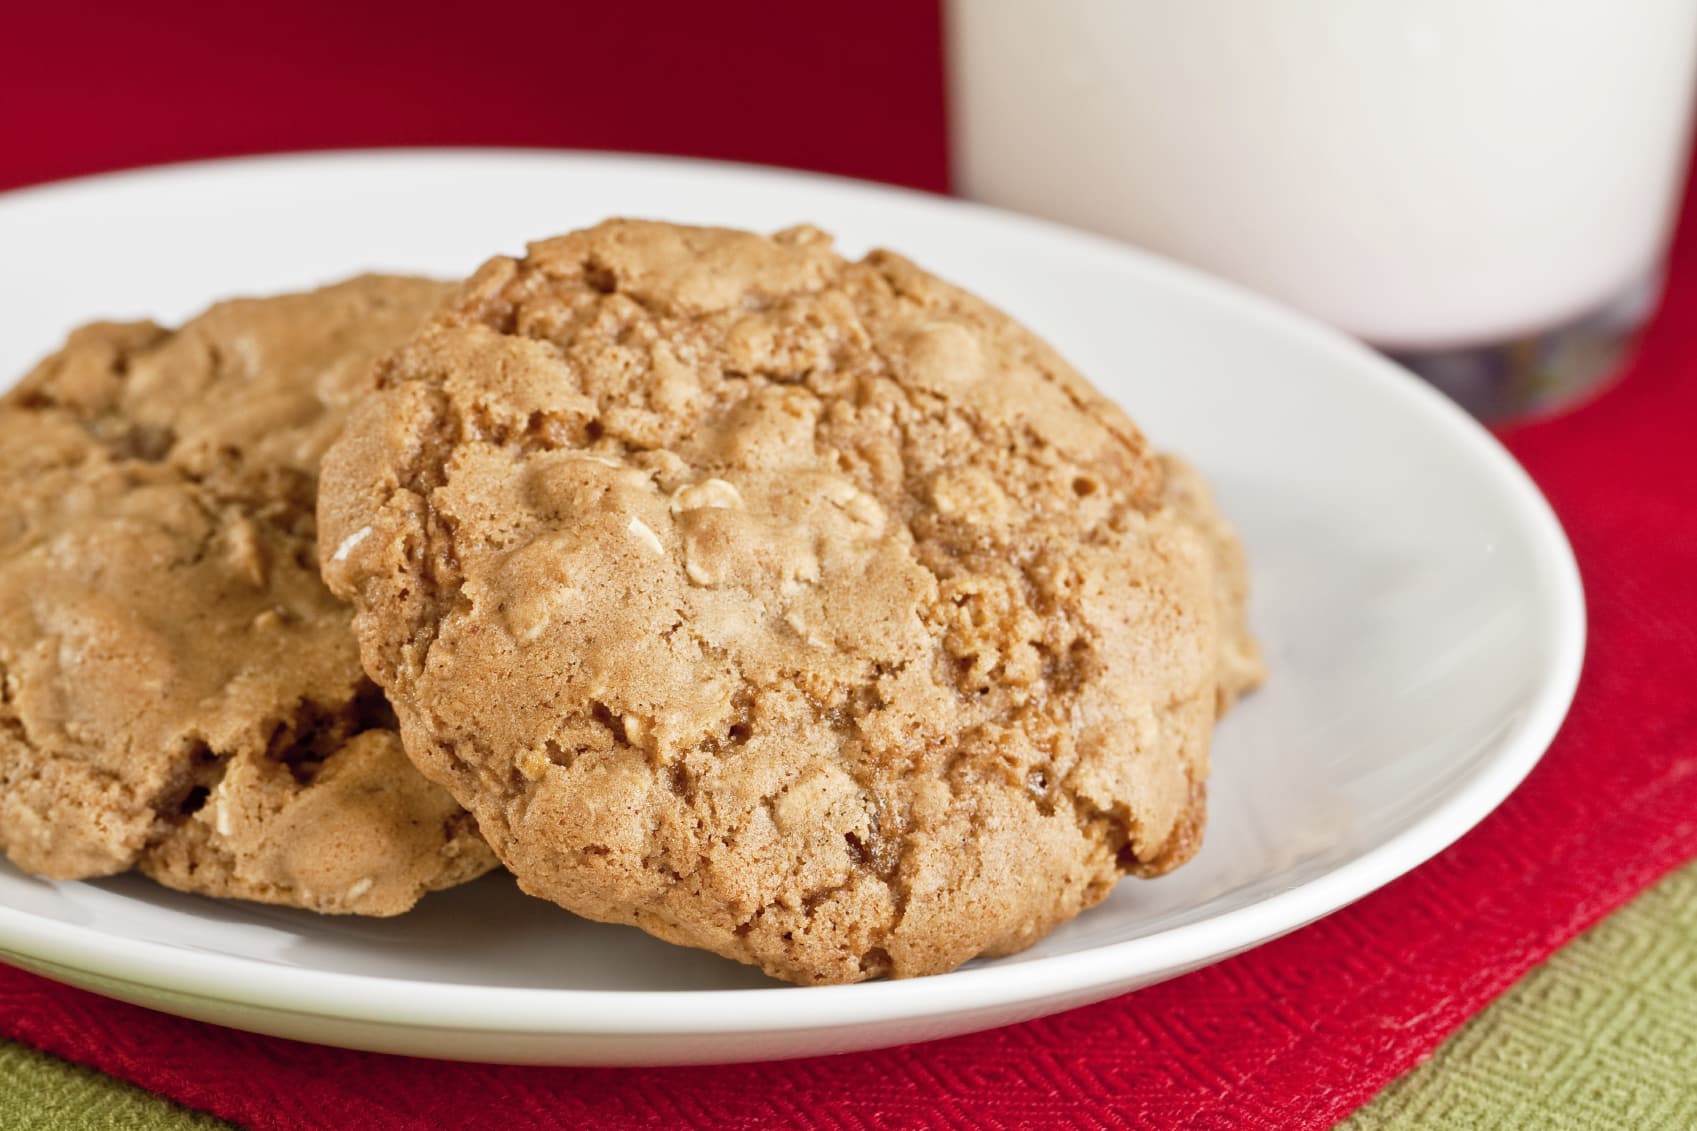 Try this healthier peanut butter cookie recipe packed with healthy ingredients and fiber!